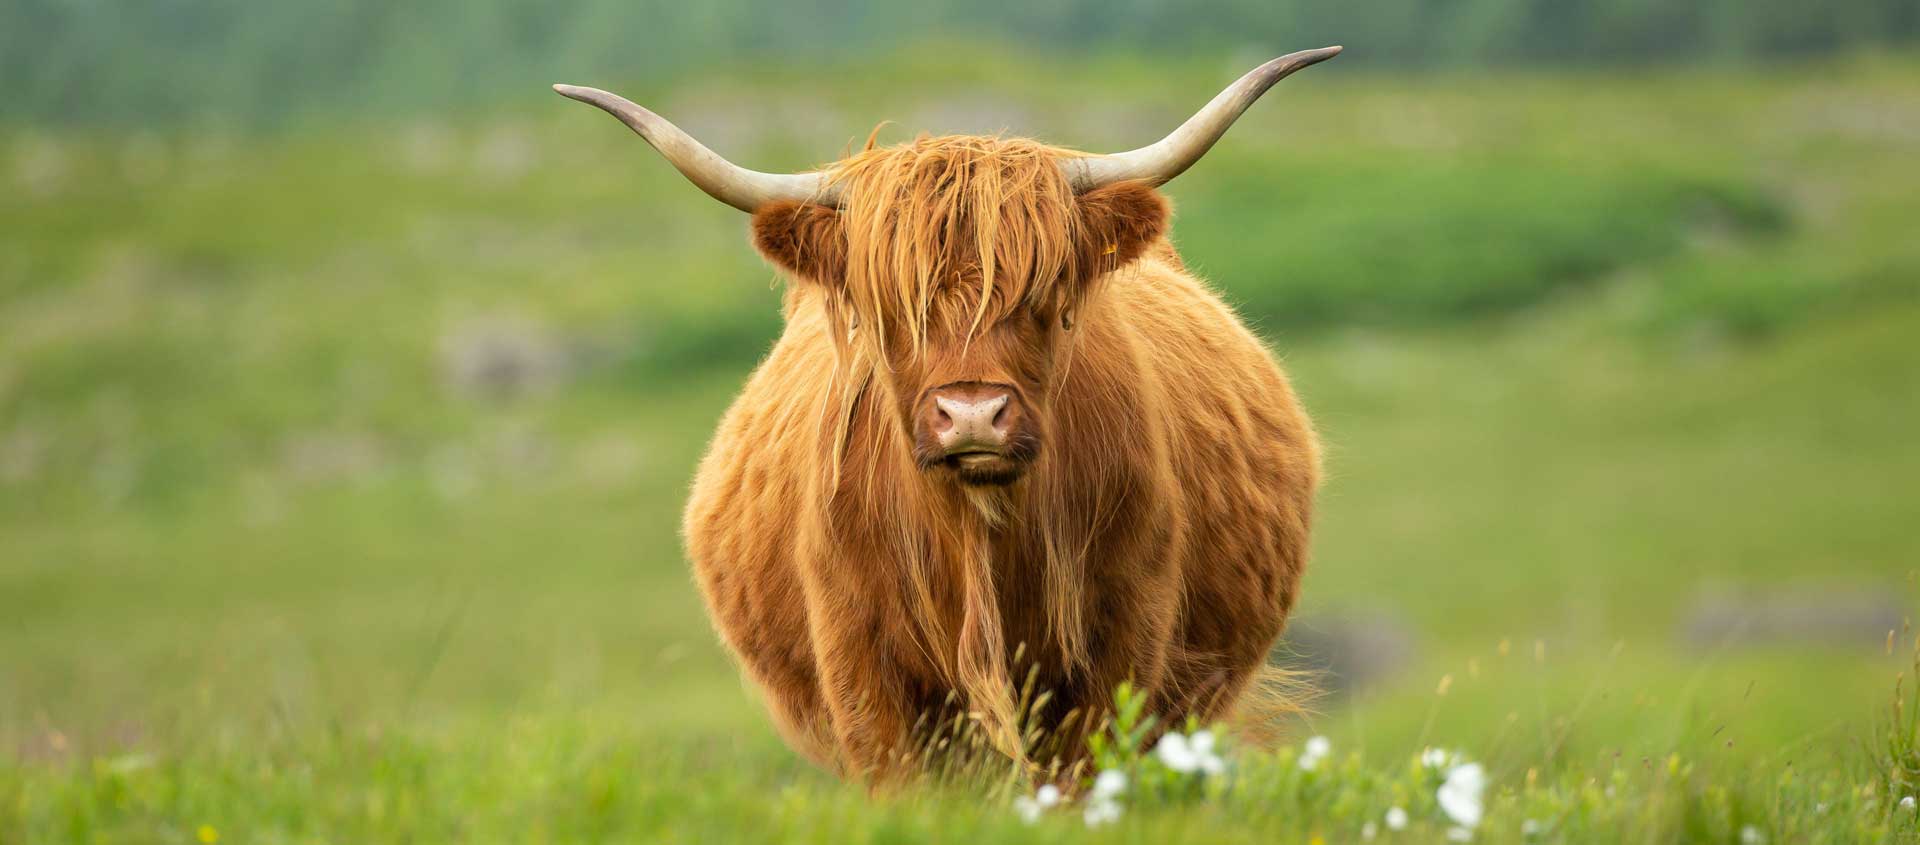 British Isles cruise image of a Highland Cow in Scotland